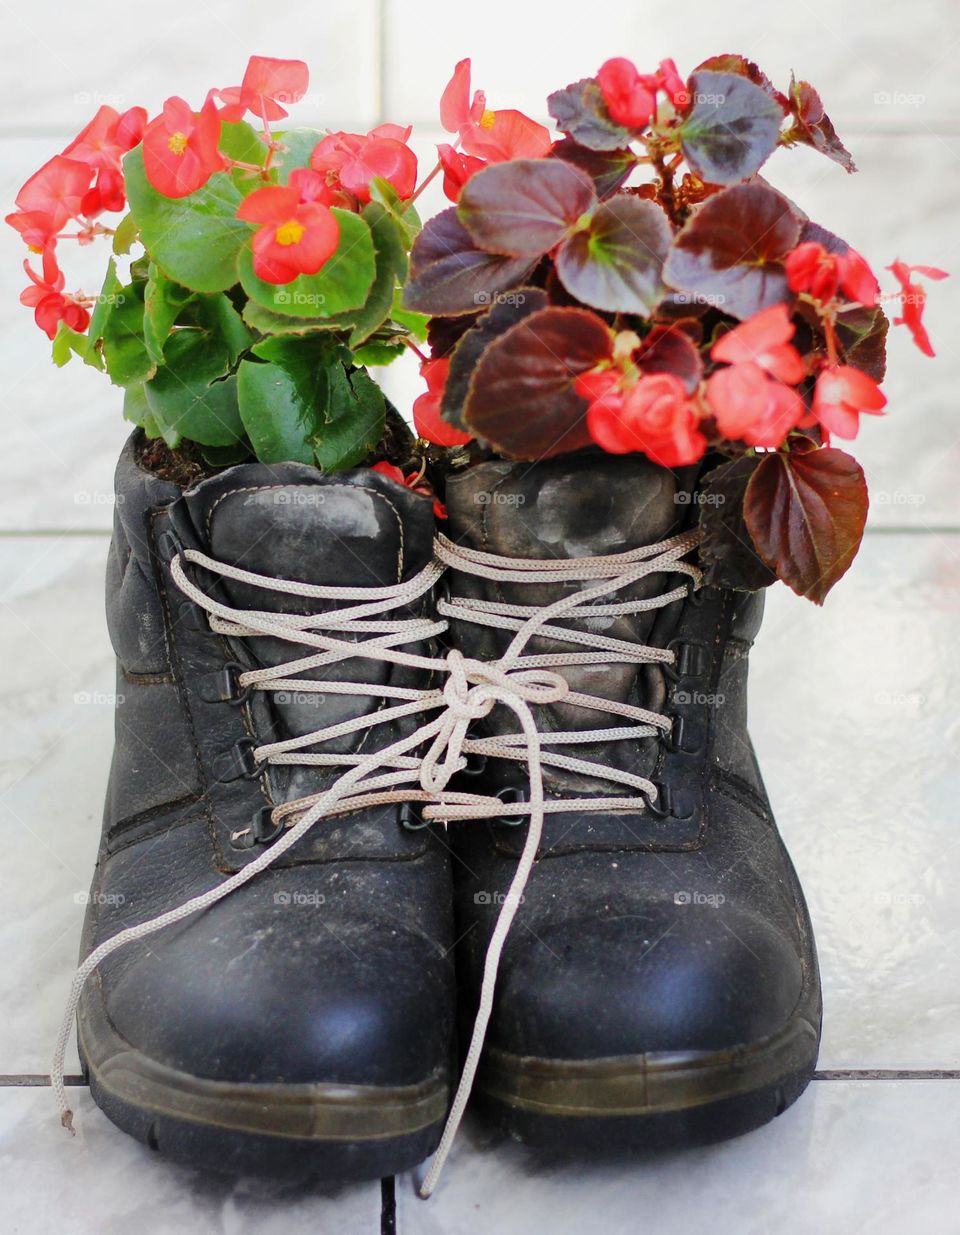 New life for the old shoes, potted flowers